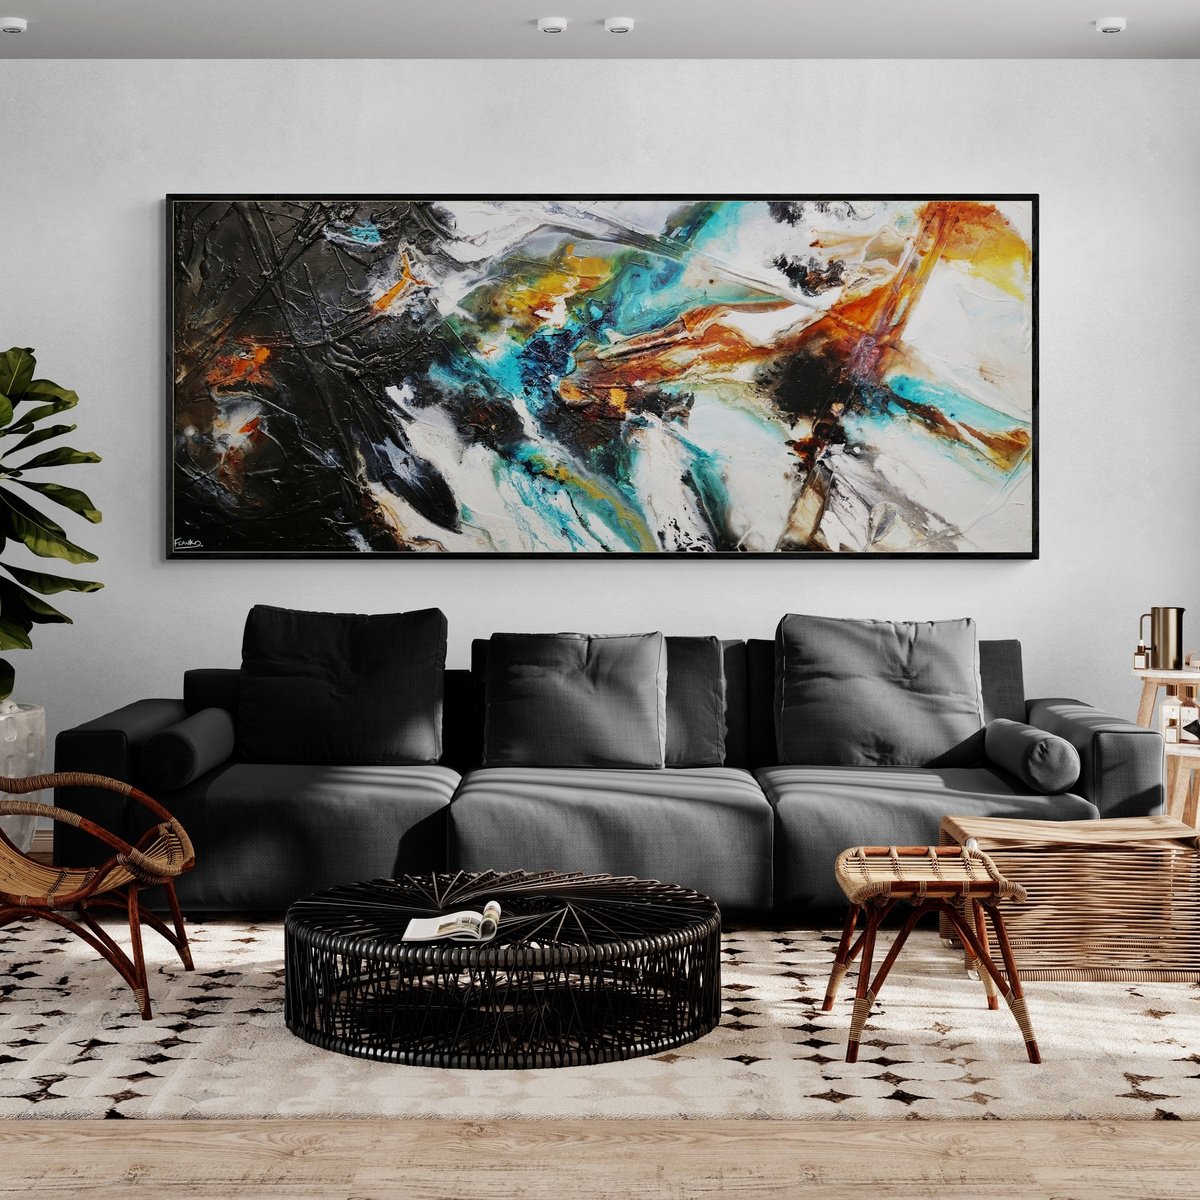 Blended Potion 240cm x 100cm Textured Abstract Art by Franko